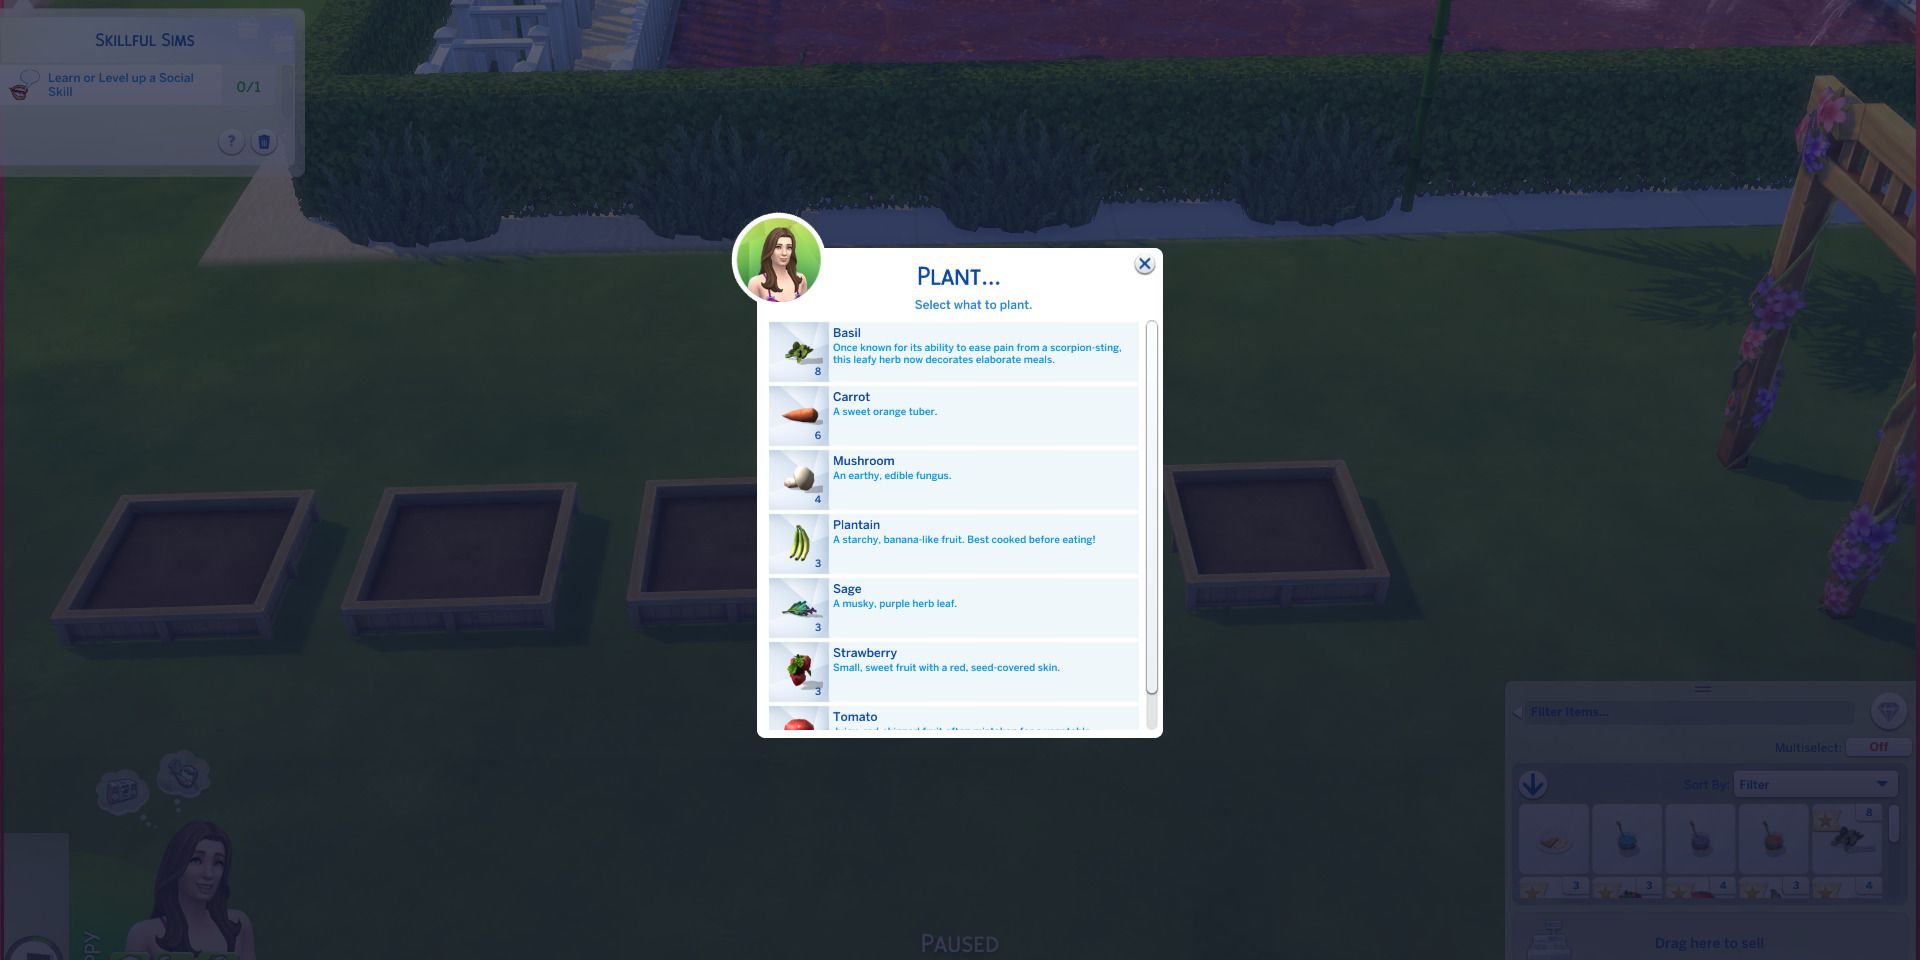 Image of a sim choosing some vegetables to plant in The Sims 4